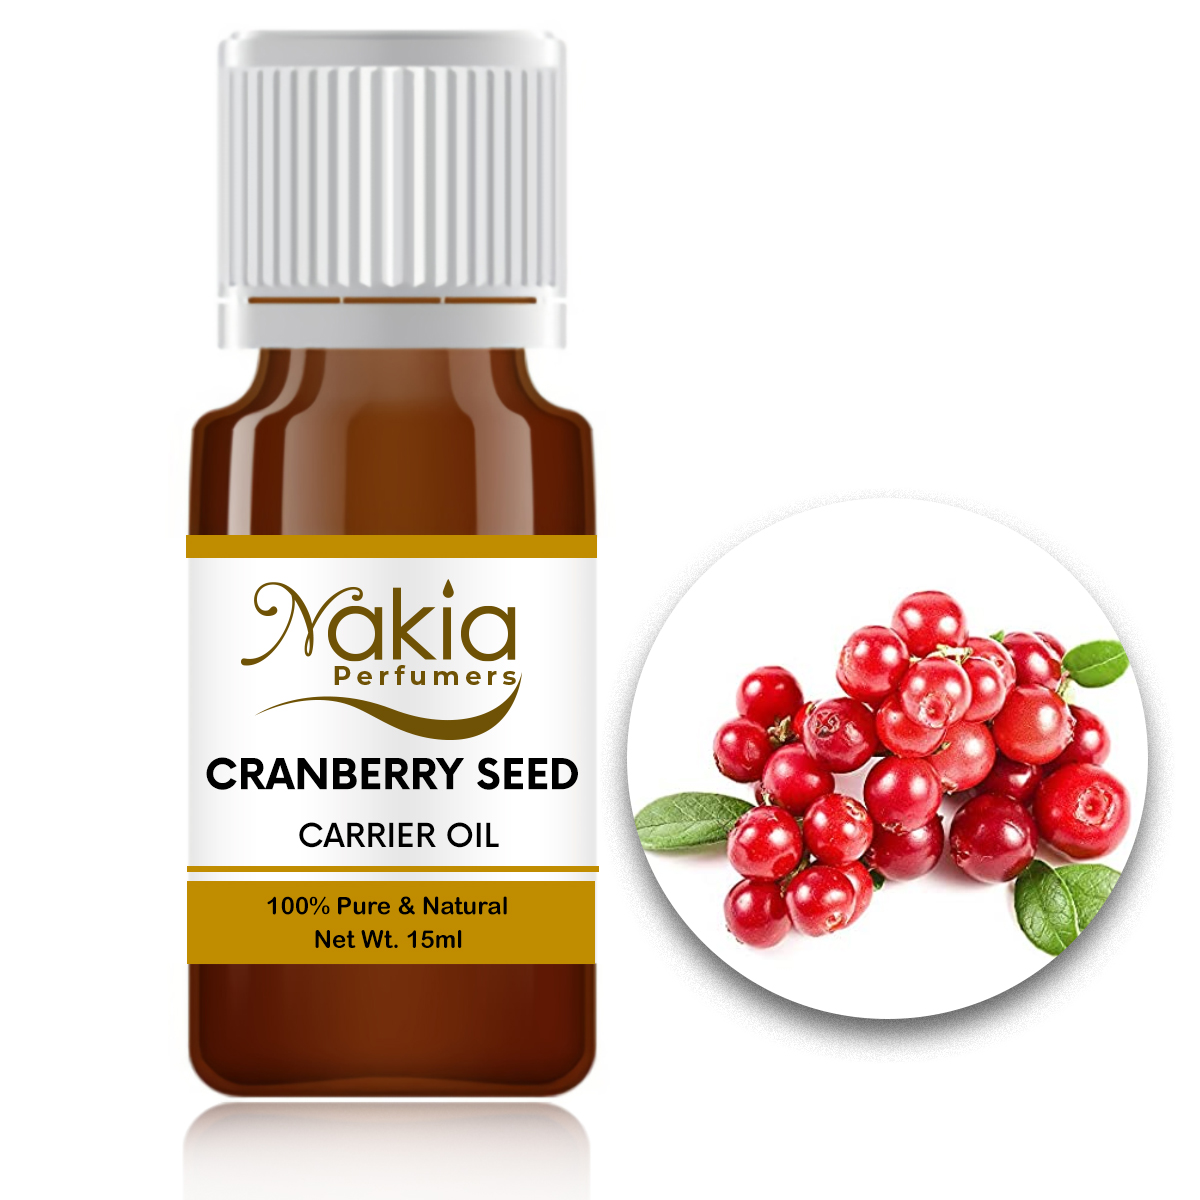 CRANBERRY-SEED CARRIER OIL